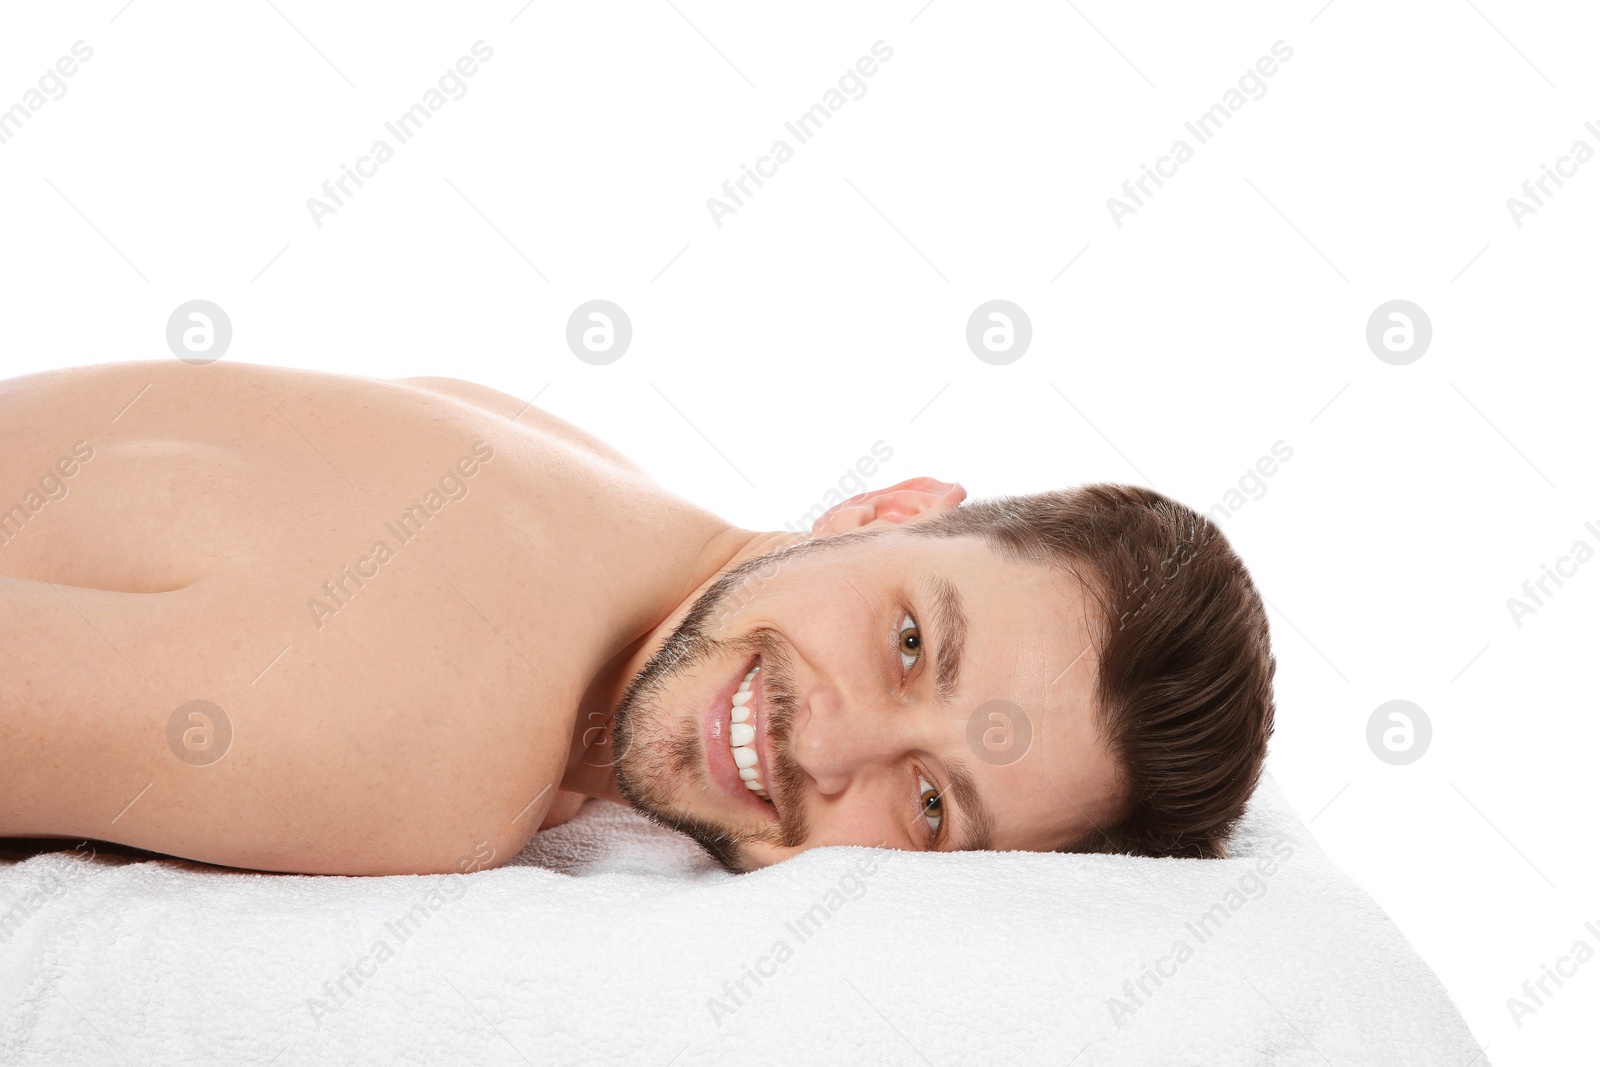 Photo of Handsome man relaxing on massage table against white background. Spa service